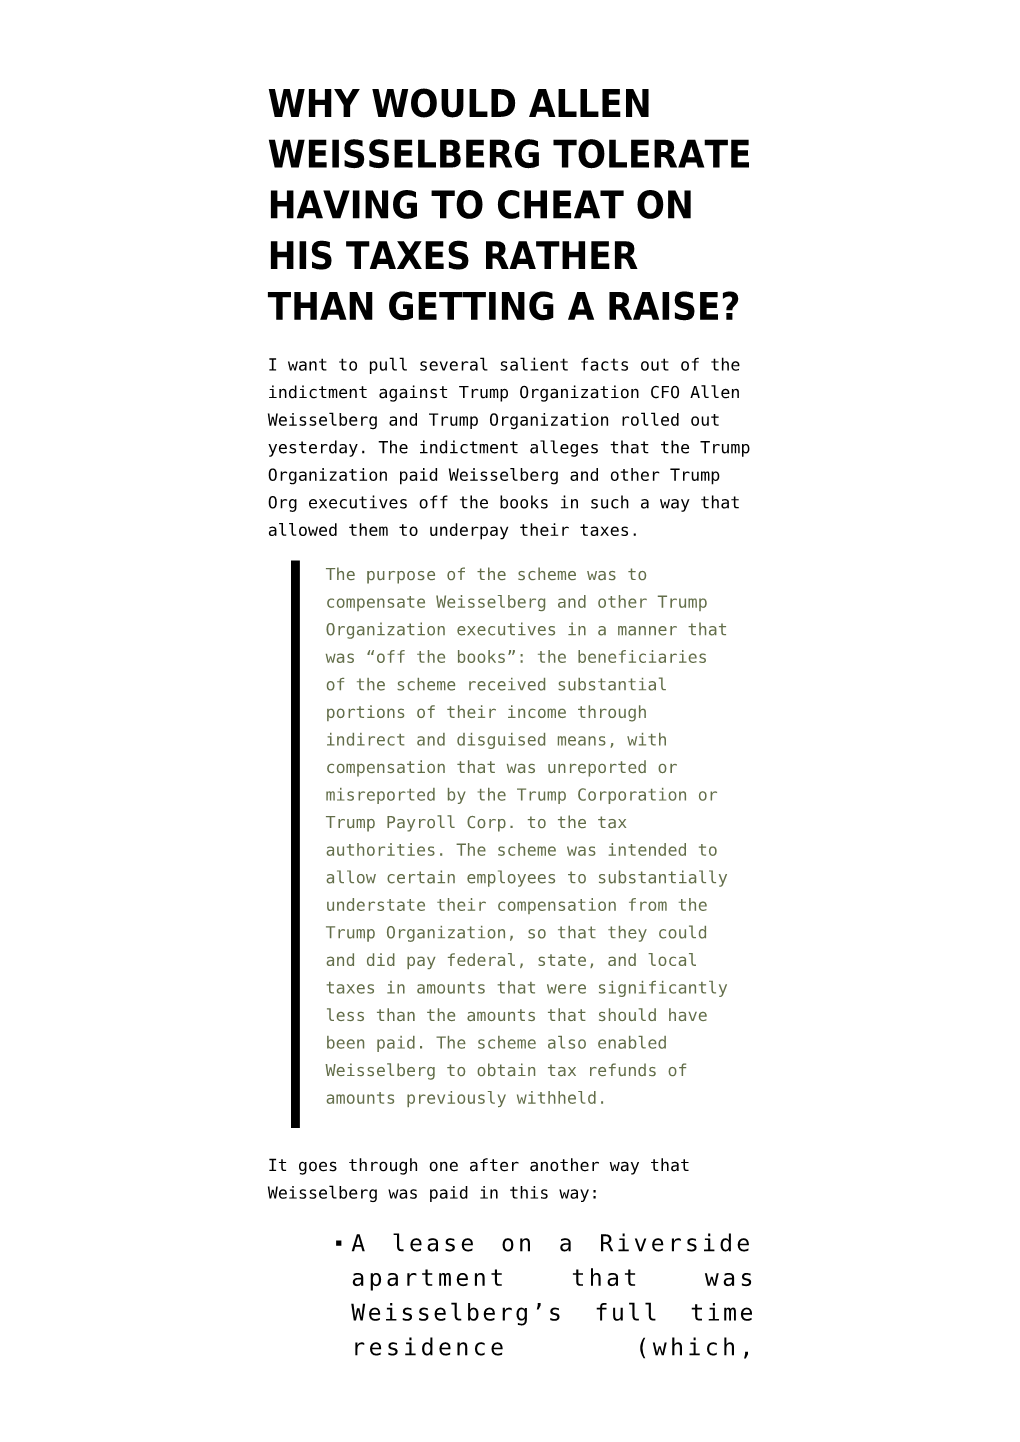 Why Would Allen Weisselberg Tolerate Having to Cheat on His Taxes Rather Than Getting a Raise?